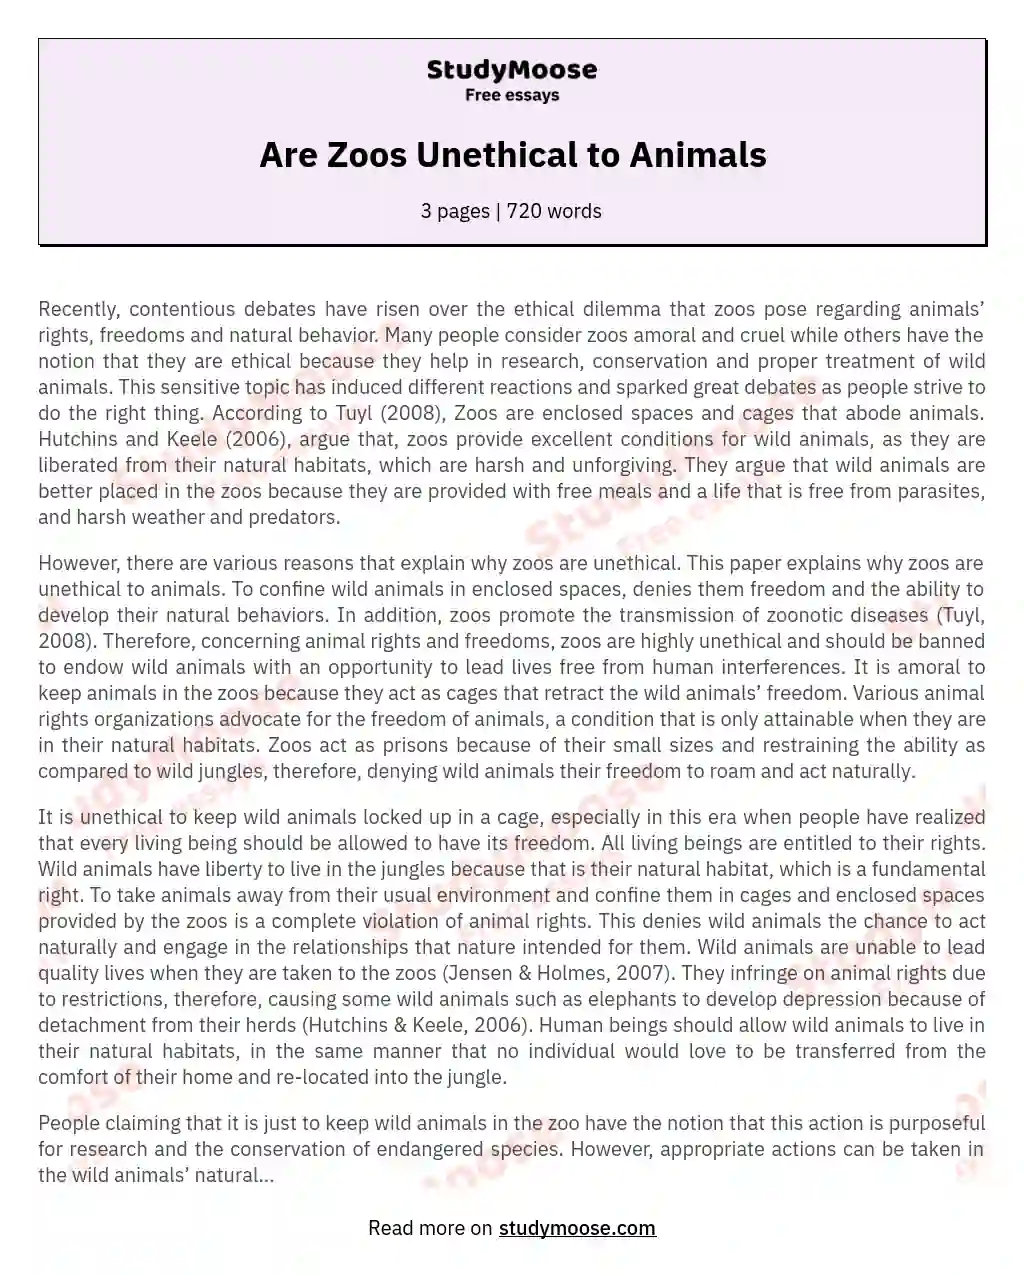 Are Zoos Unethical to Animals essay